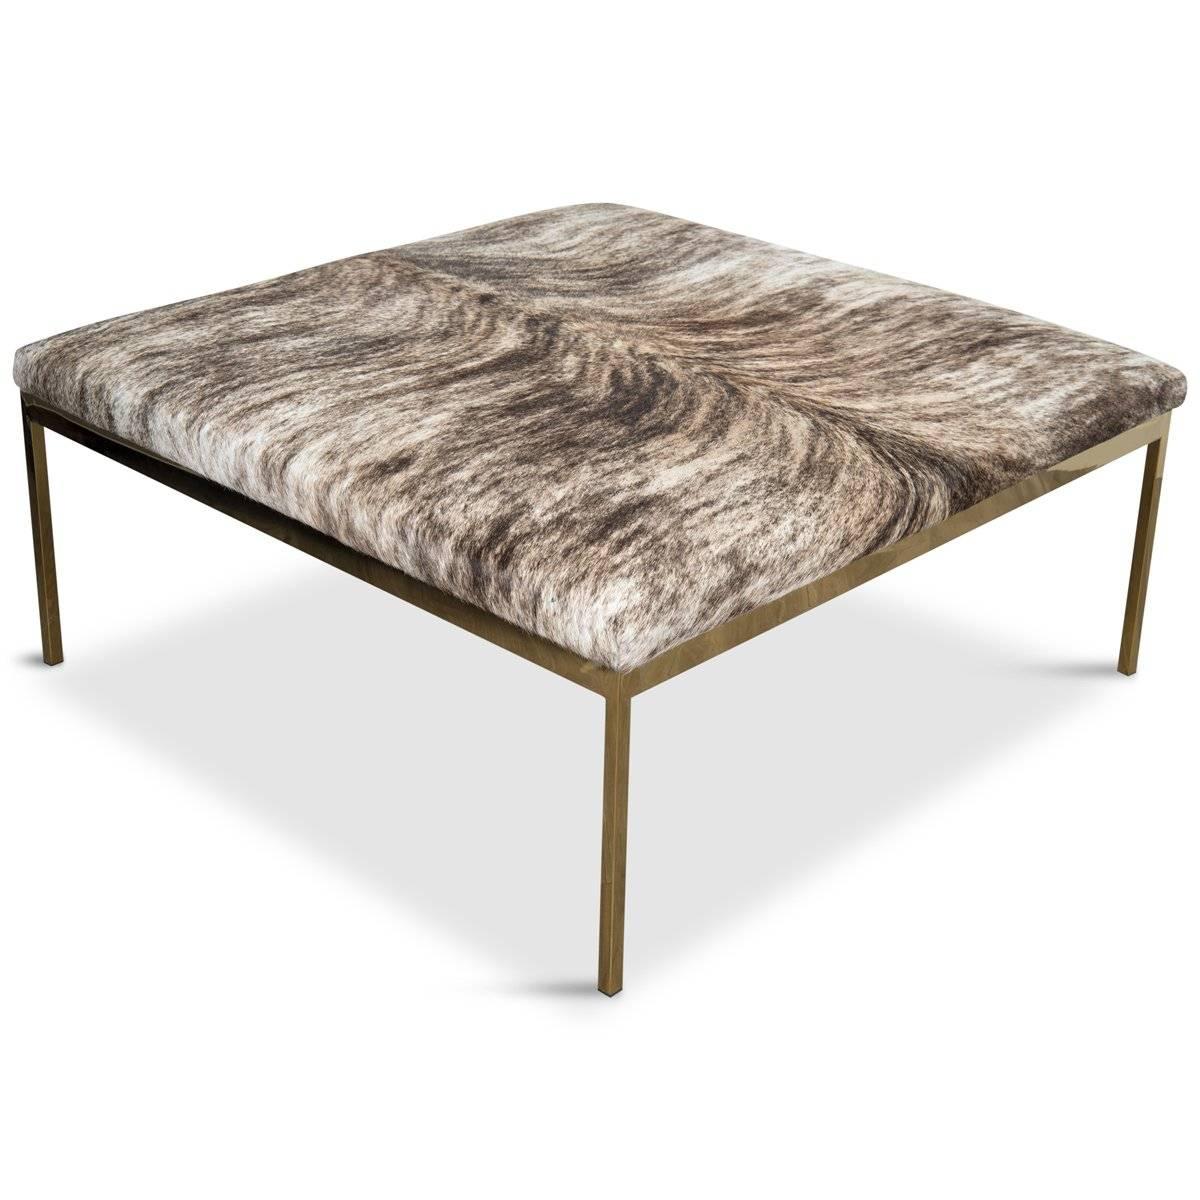 The Bordeaux ottoman has a simple, classic, yet elegant brass frame. Finished with brindle cowhide, the Bordeaux ottoman is the perfect centerpiece for any living room. 

 Dimensions:
41